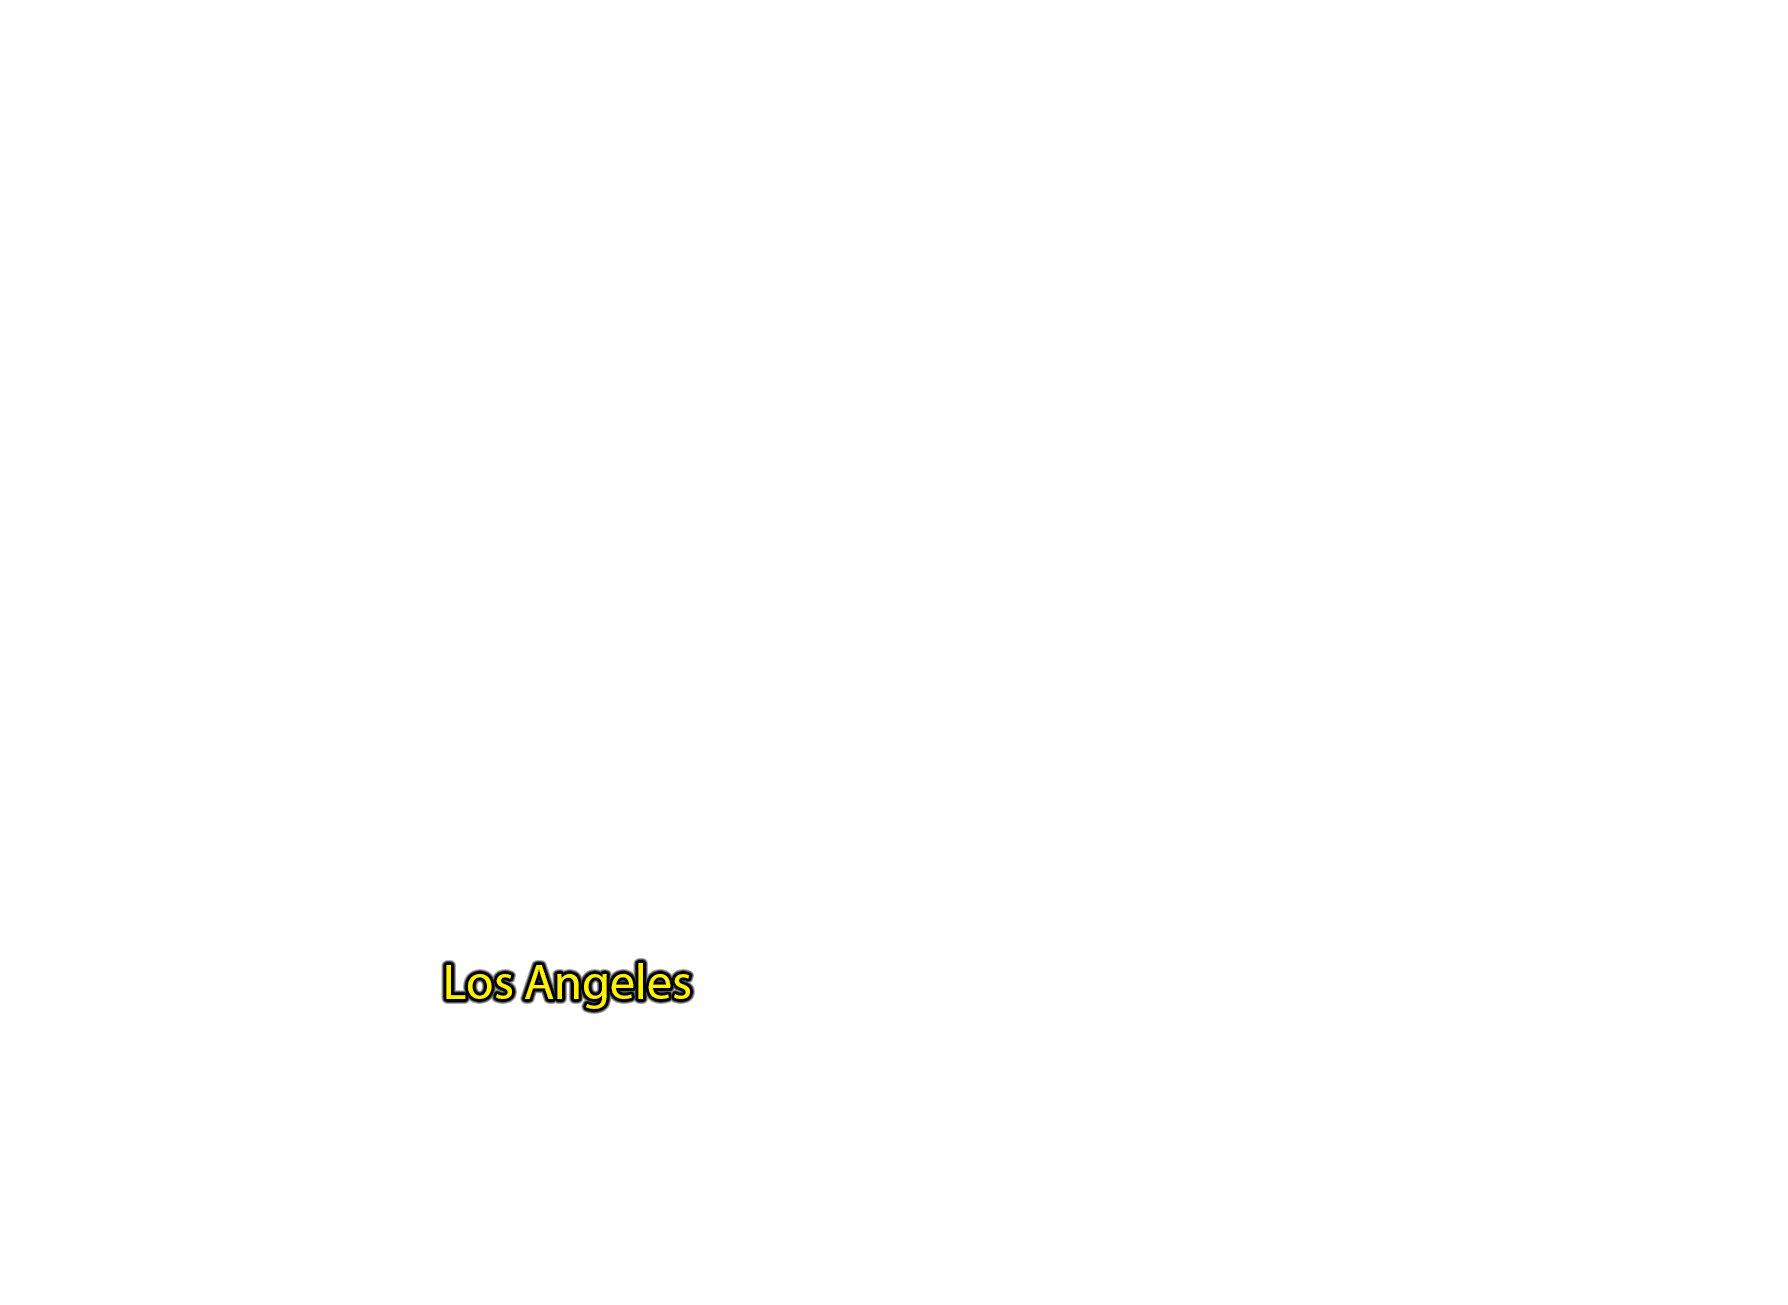 Los-Angeles label with glow